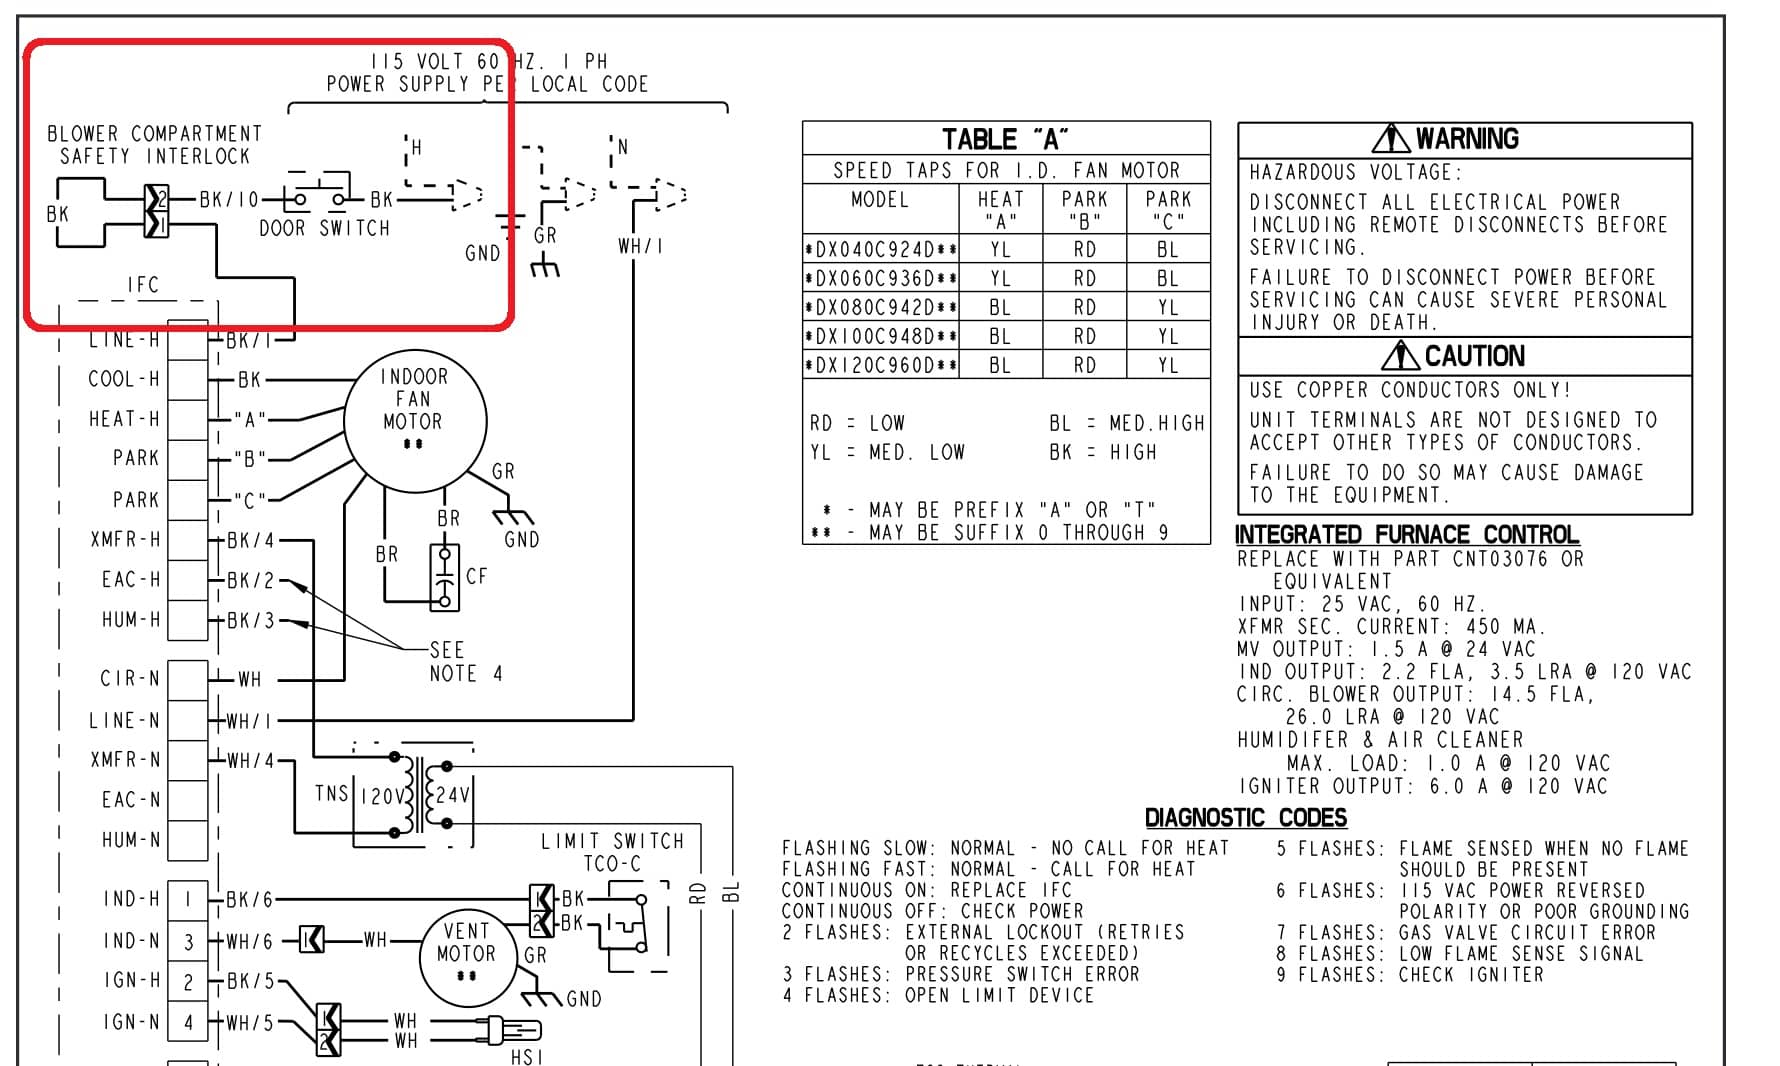 Diagram Exhaust Fan Interlock Wiring Diagram Full Version within proportions 1780 X 1066